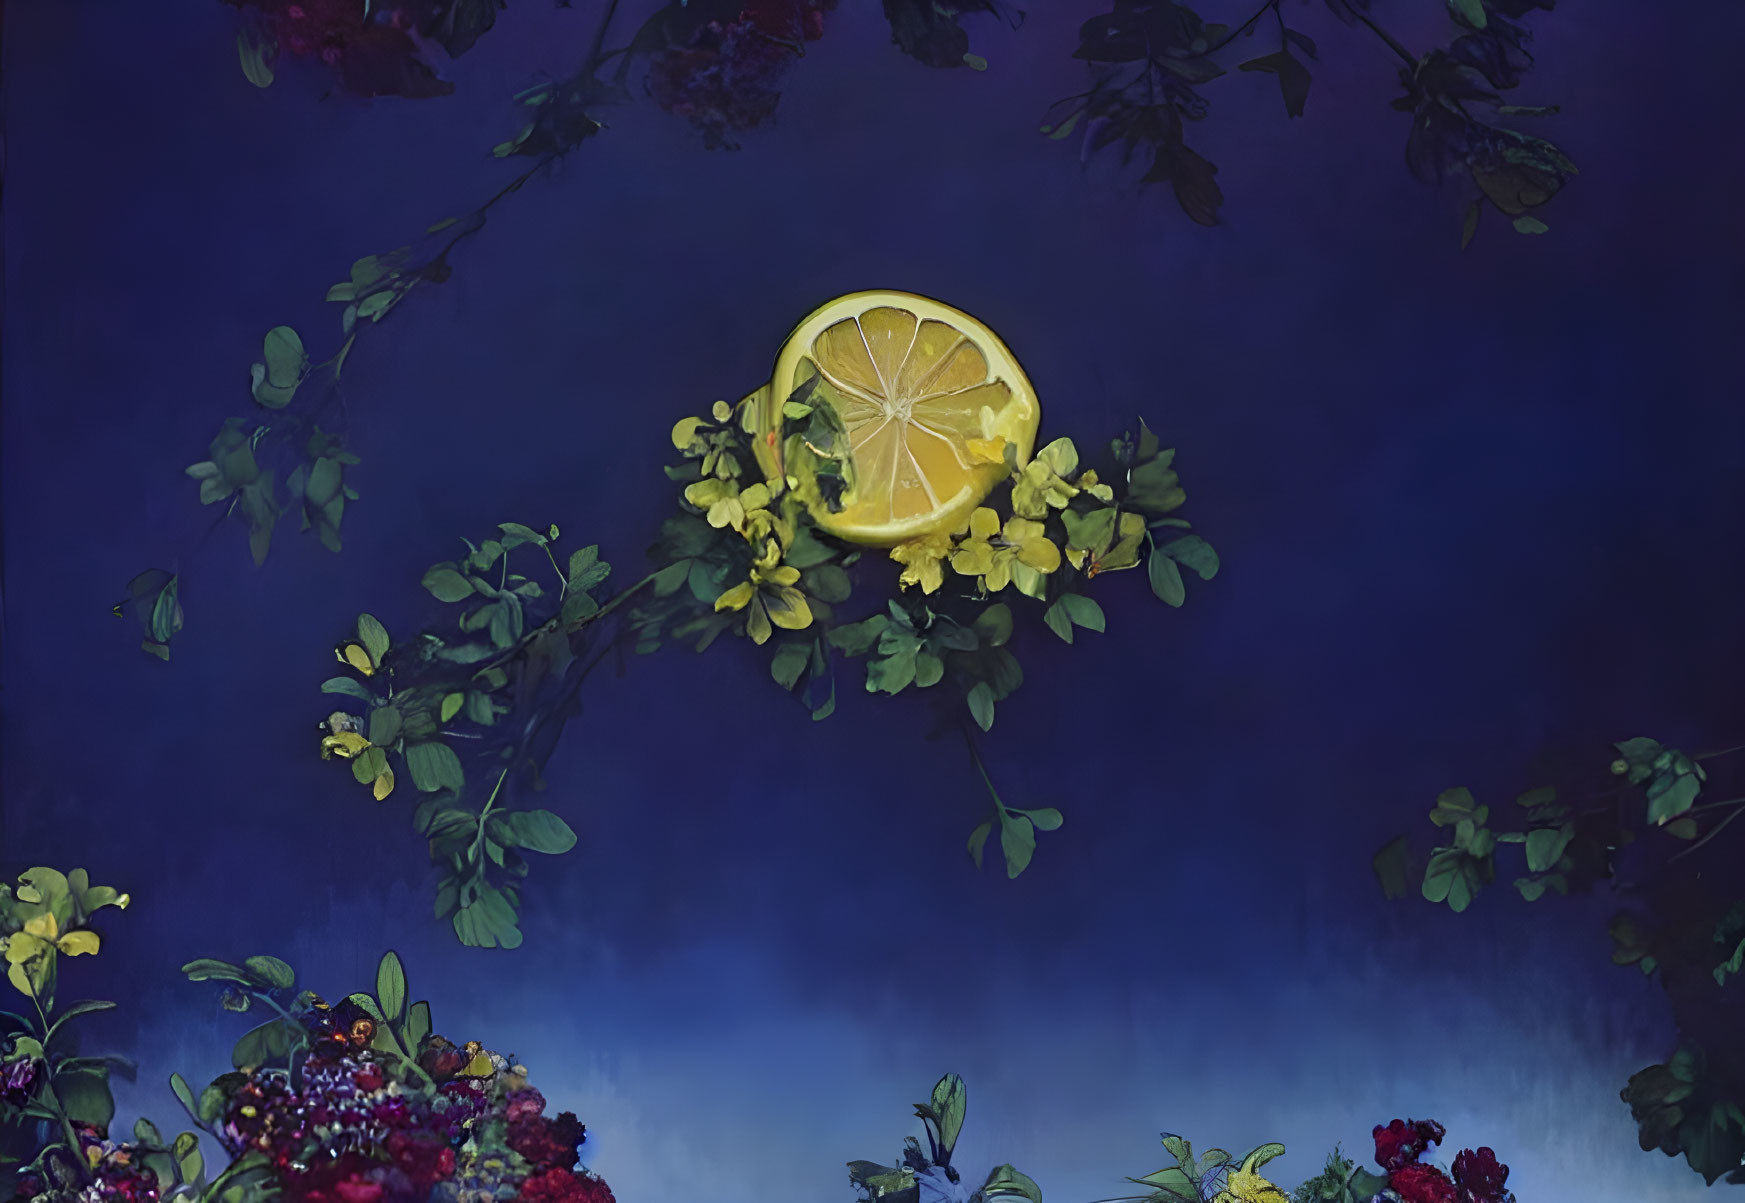 Bright lemon slice in enchanting scene with dark blue background and lush, colorful flora.